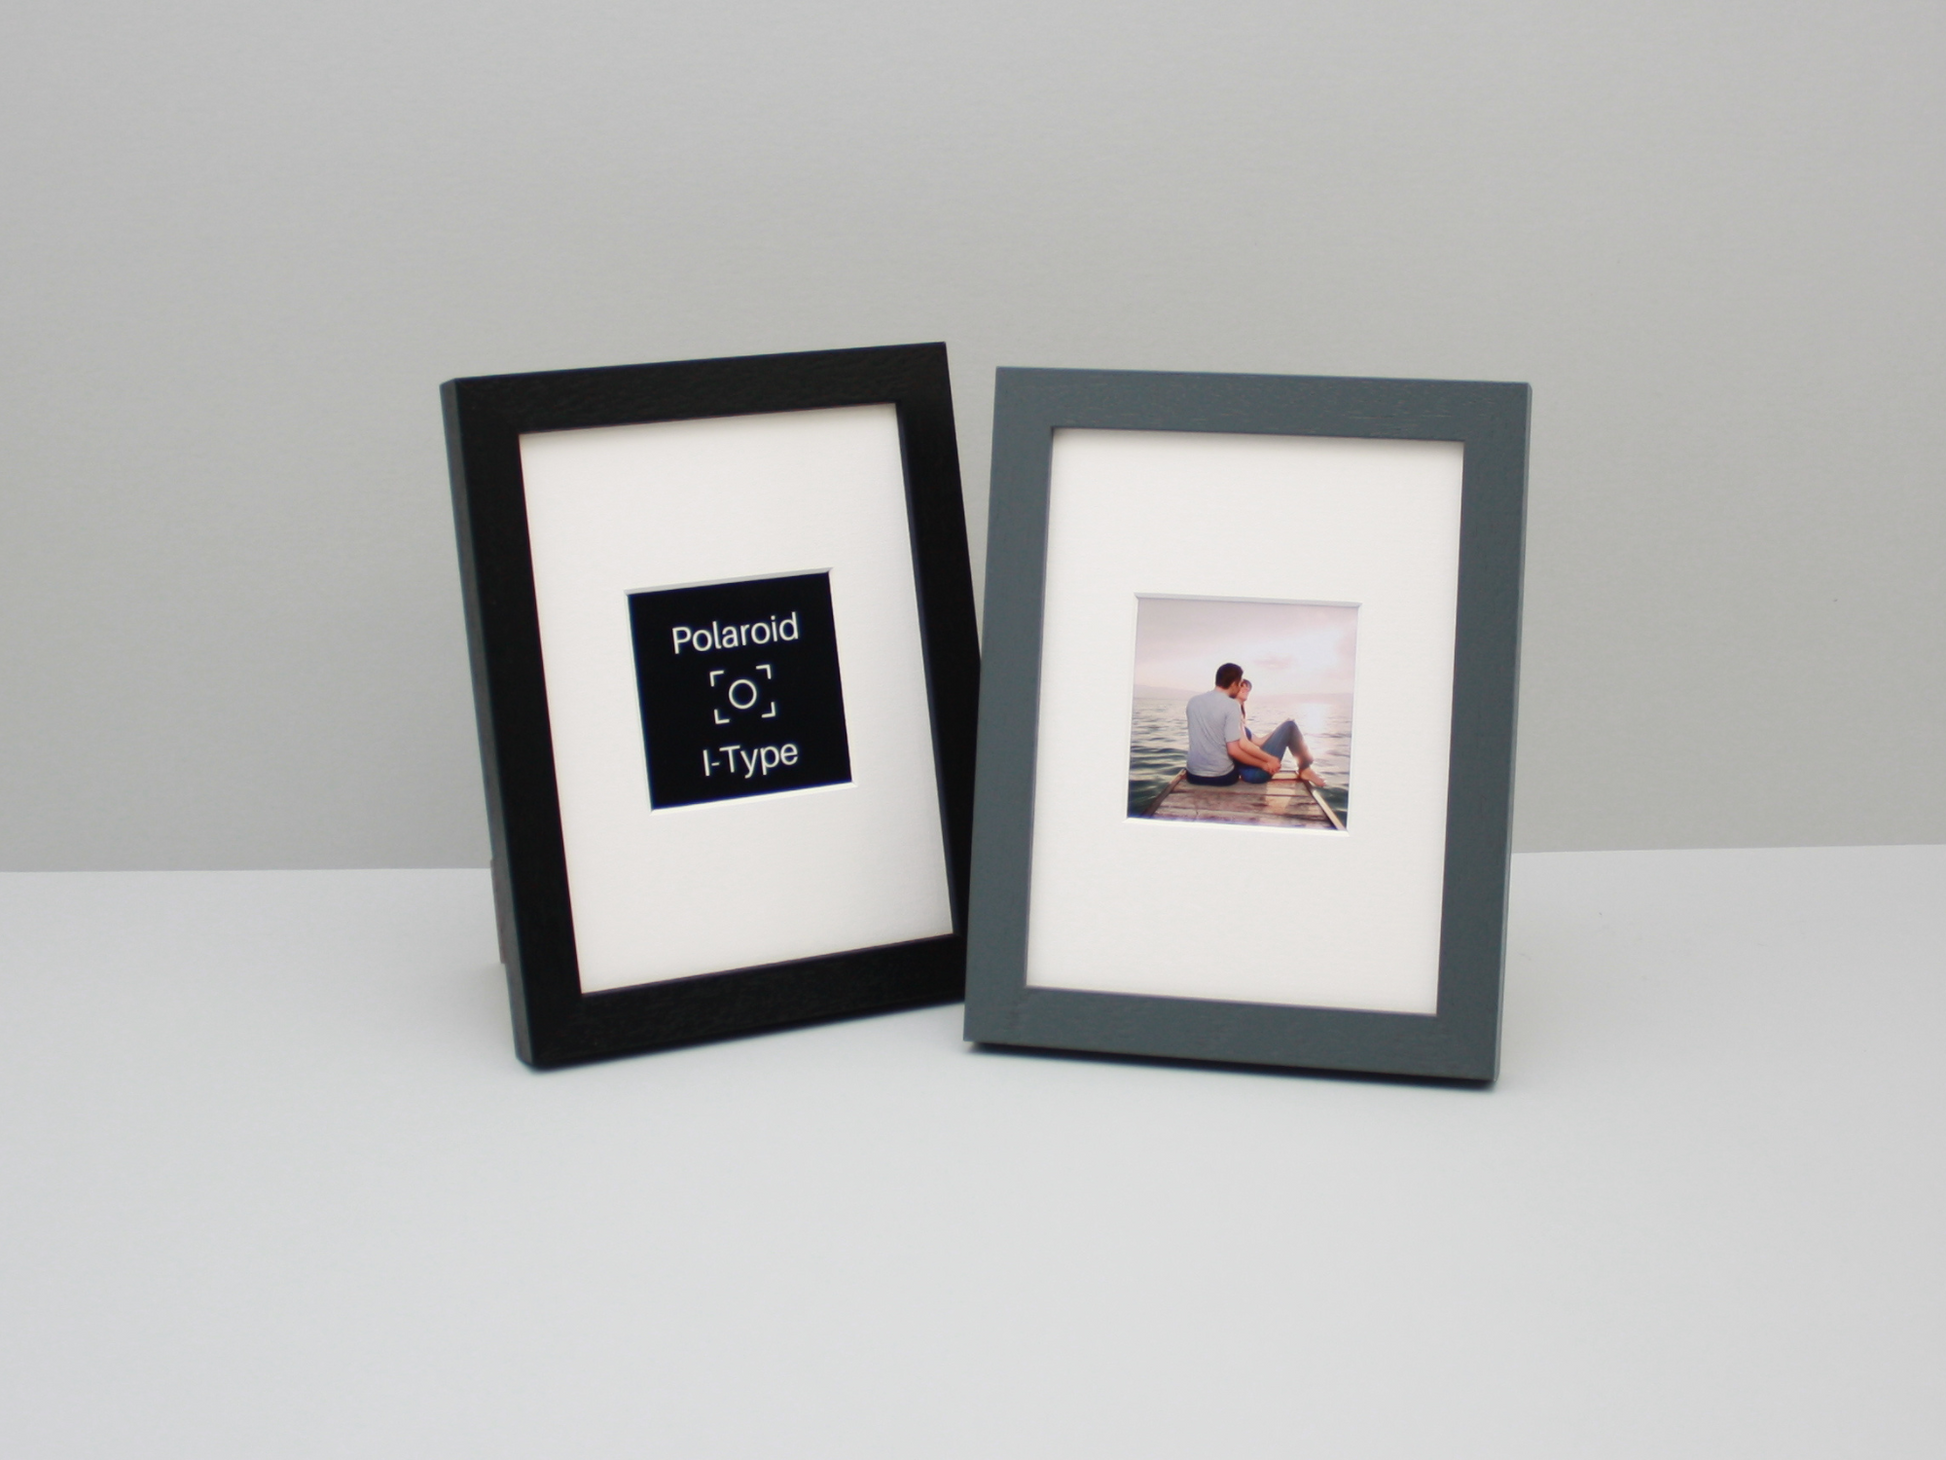 Polaroid I-Type - Wooden Frame. Suits one Polaroid I-Type - Visible aperture 76mmx76mm sized Photo. 8x6" Frame. Stand and Hang option. - PhotoFramesandMore - Wooden Picture Frames